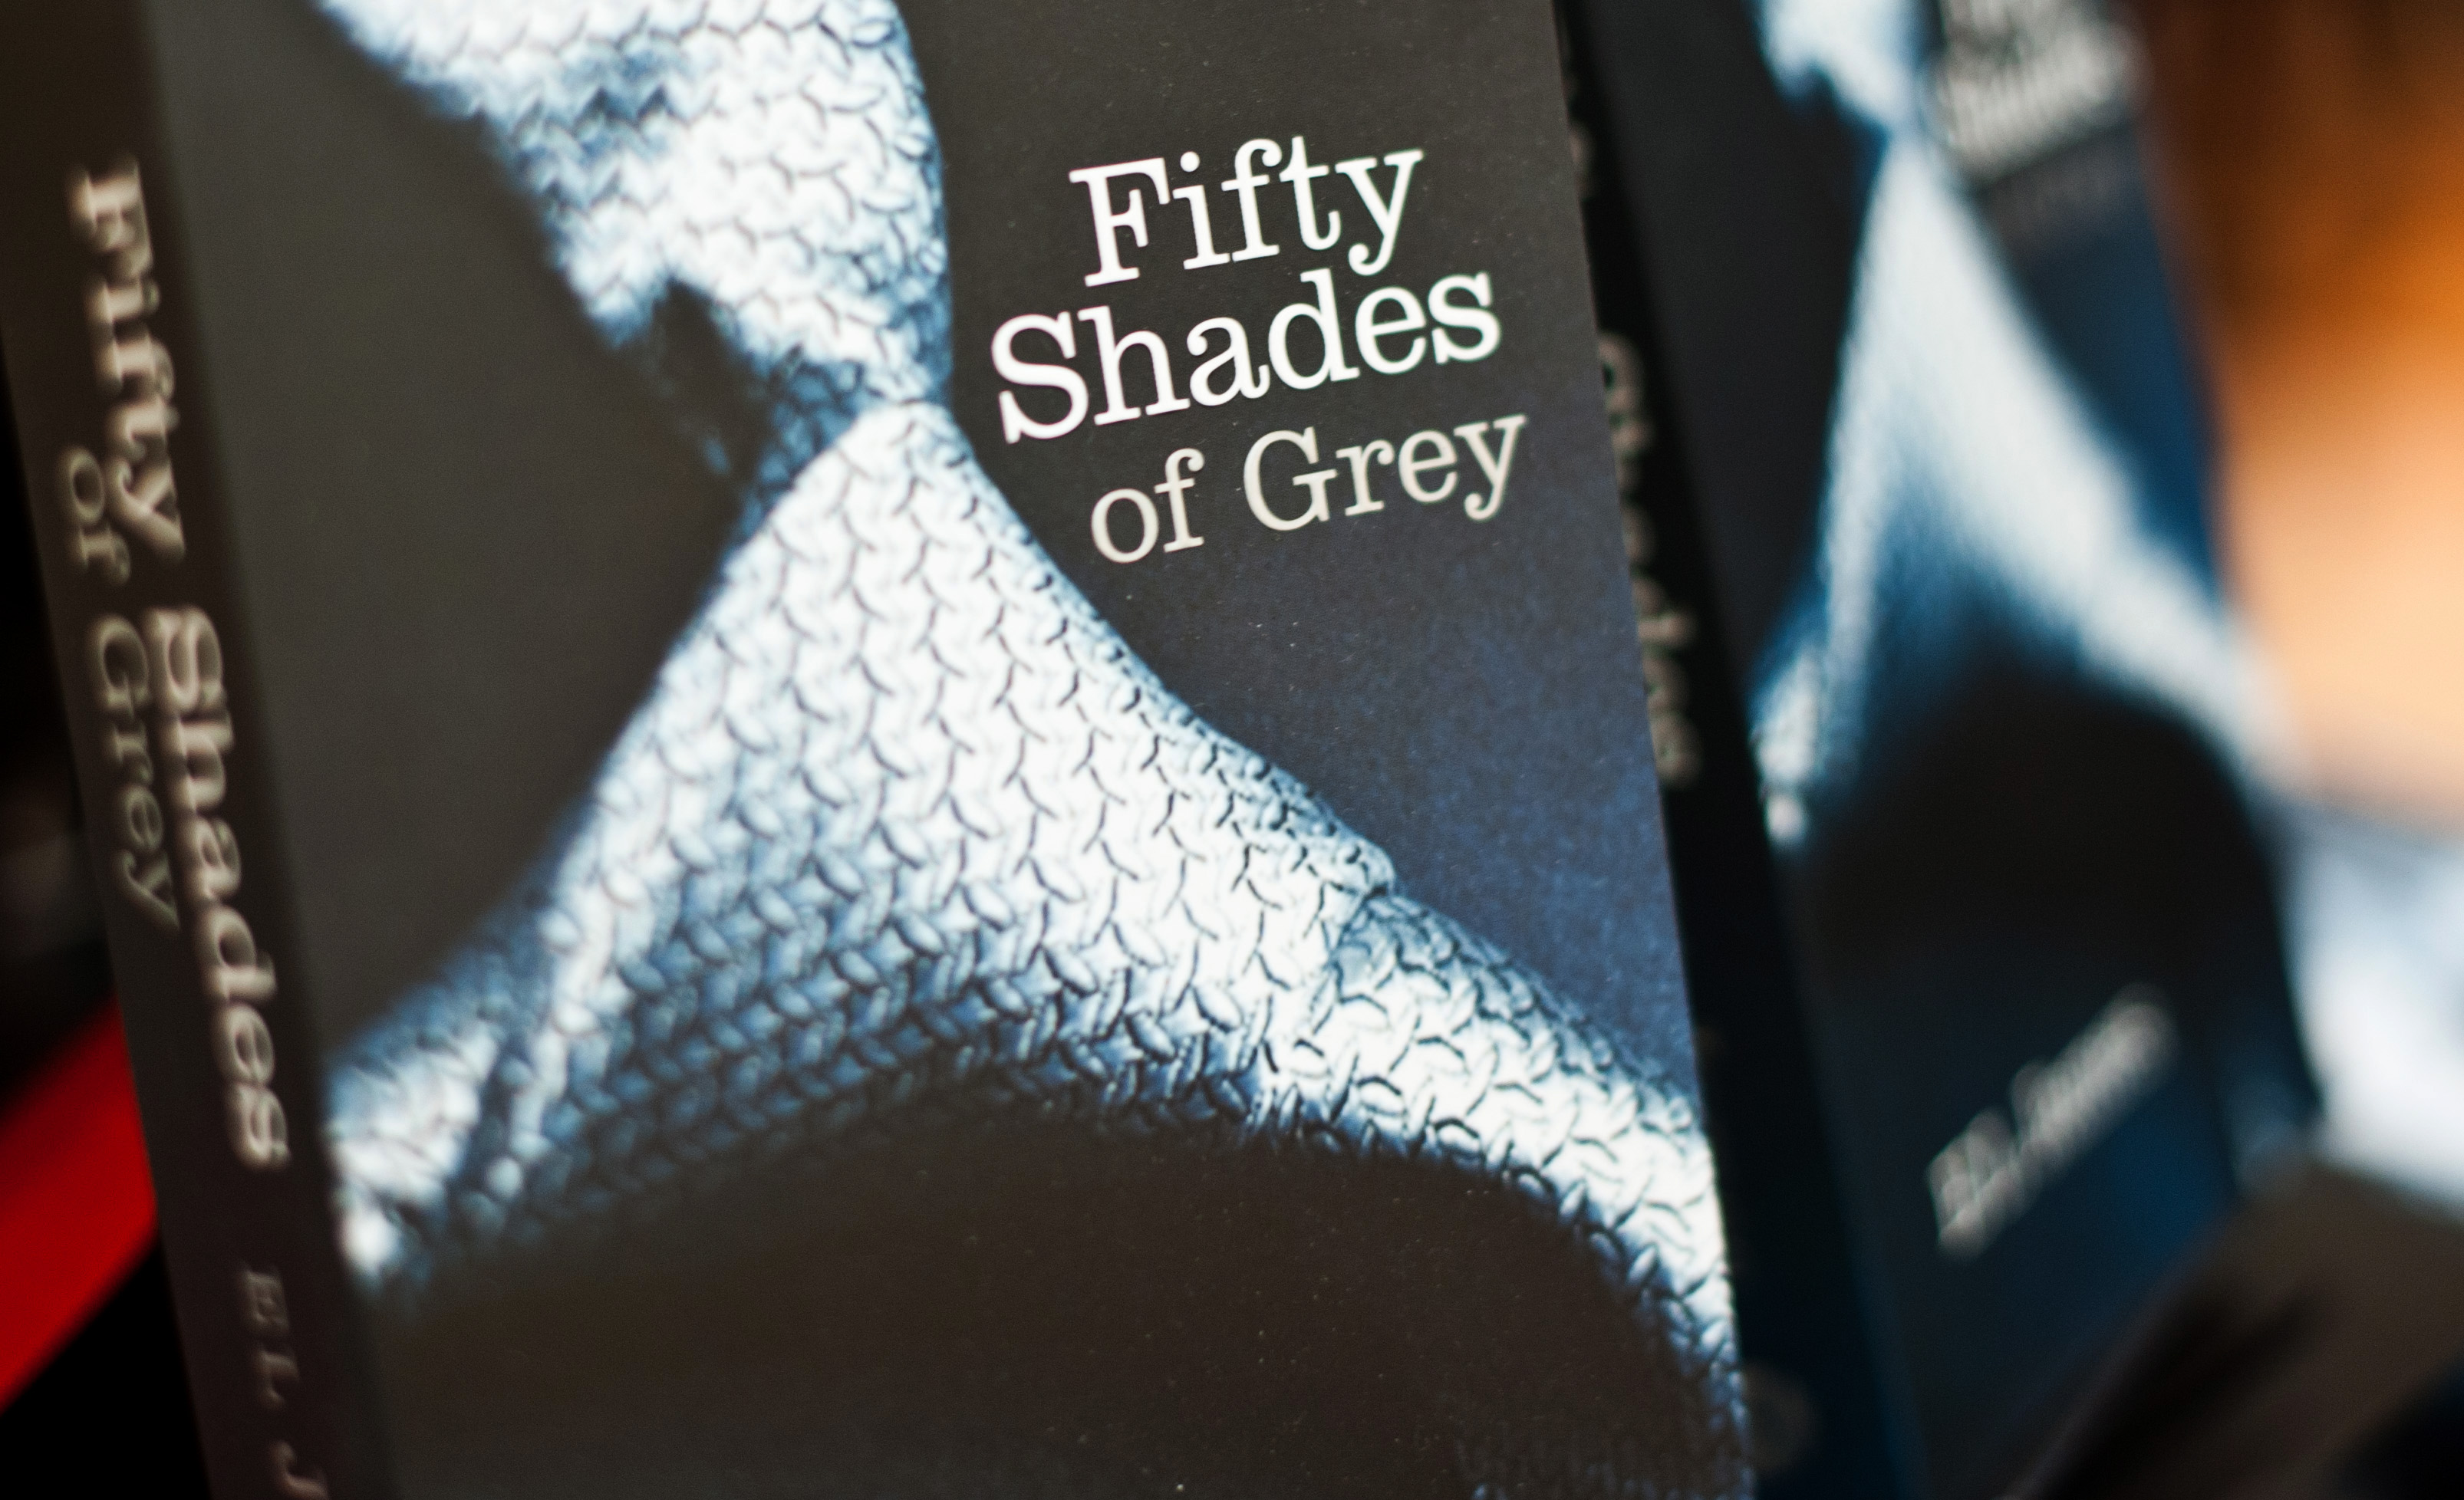 The author of "Fifty Shades of Grey" is releasing another installment in the series, this time from Christian Grey's perspective. (AFP/Getty Images)